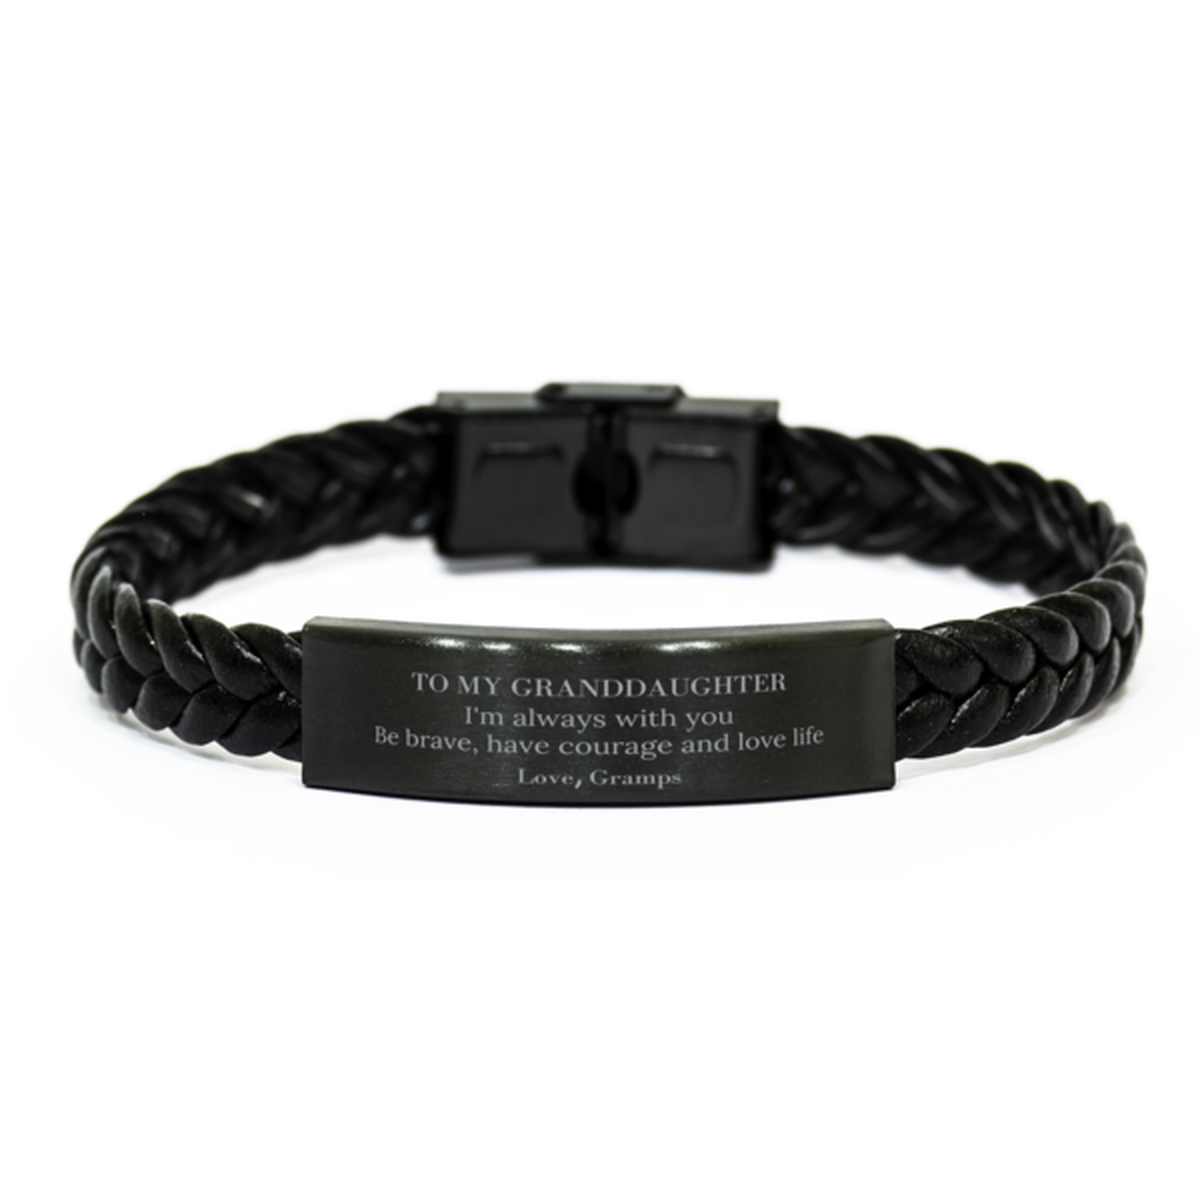 To My Granddaughter Gifts from Gramps, Unique Braided Leather Bracelet Inspirational Christmas Birthday Graduation Gifts for Granddaughter I'm always with you. Be brave, have courage and love life. Love, Gramps